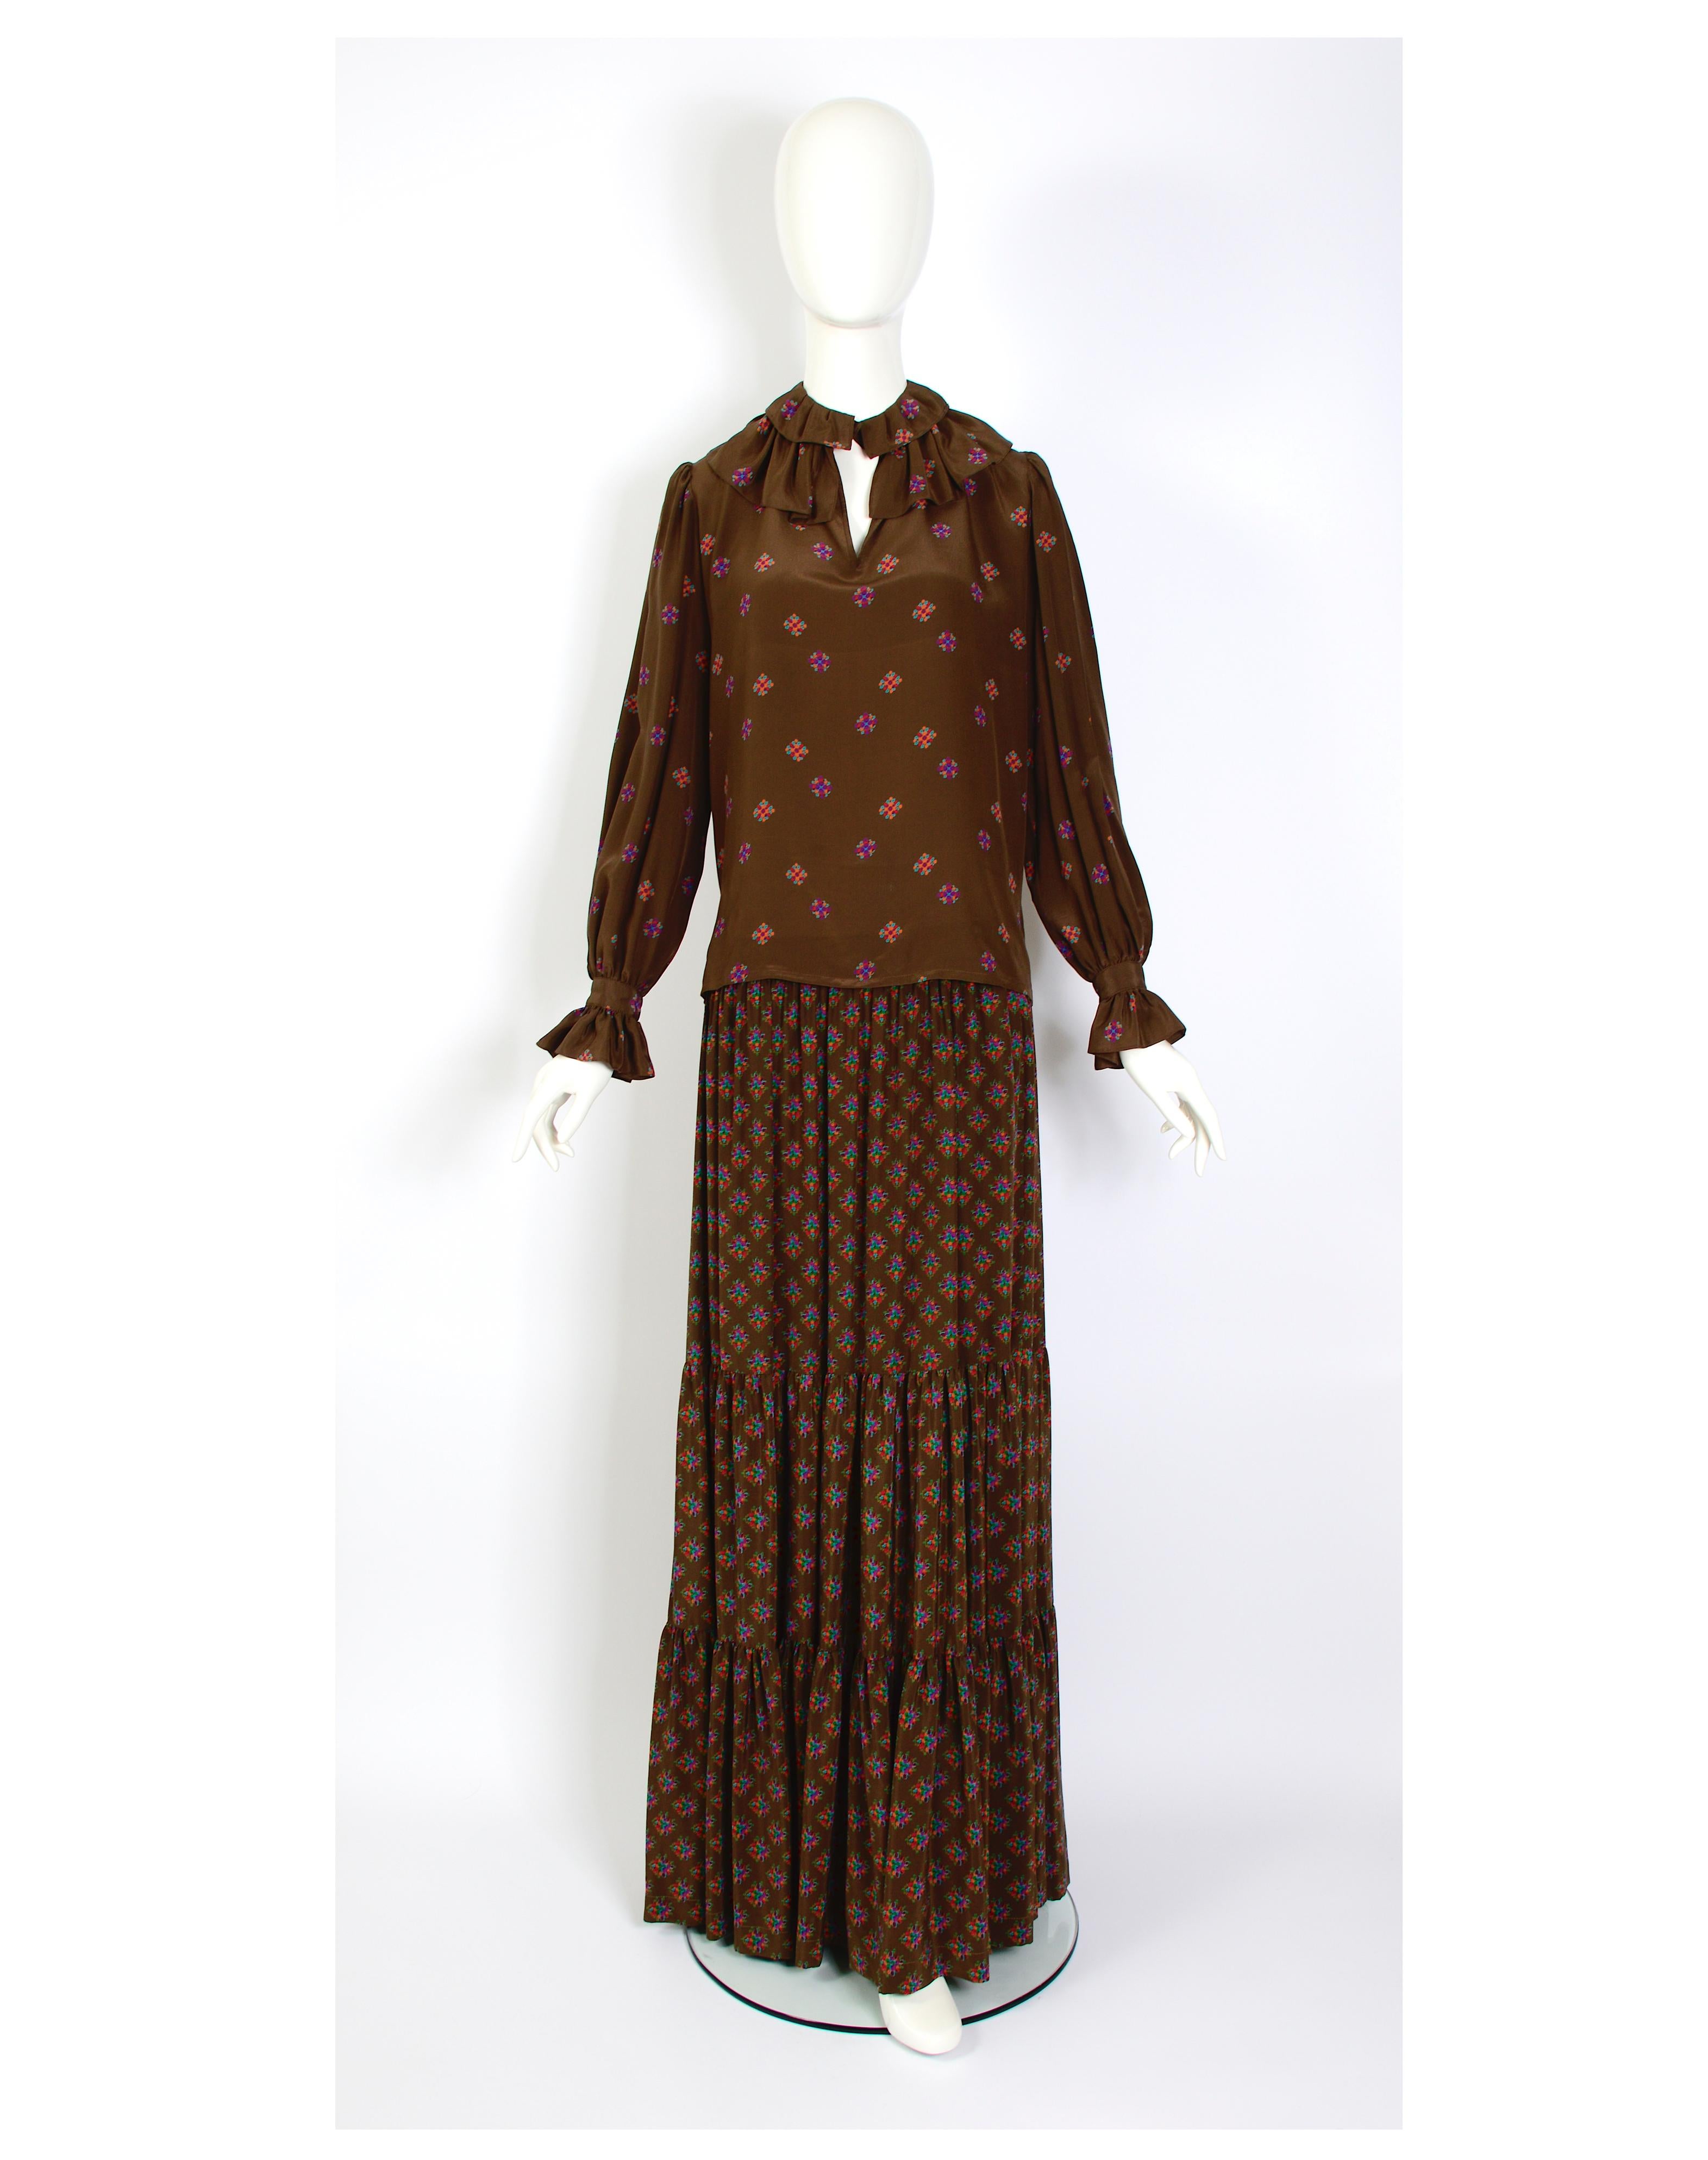 Incredible and rare 1970s Yves Saint Laurent 